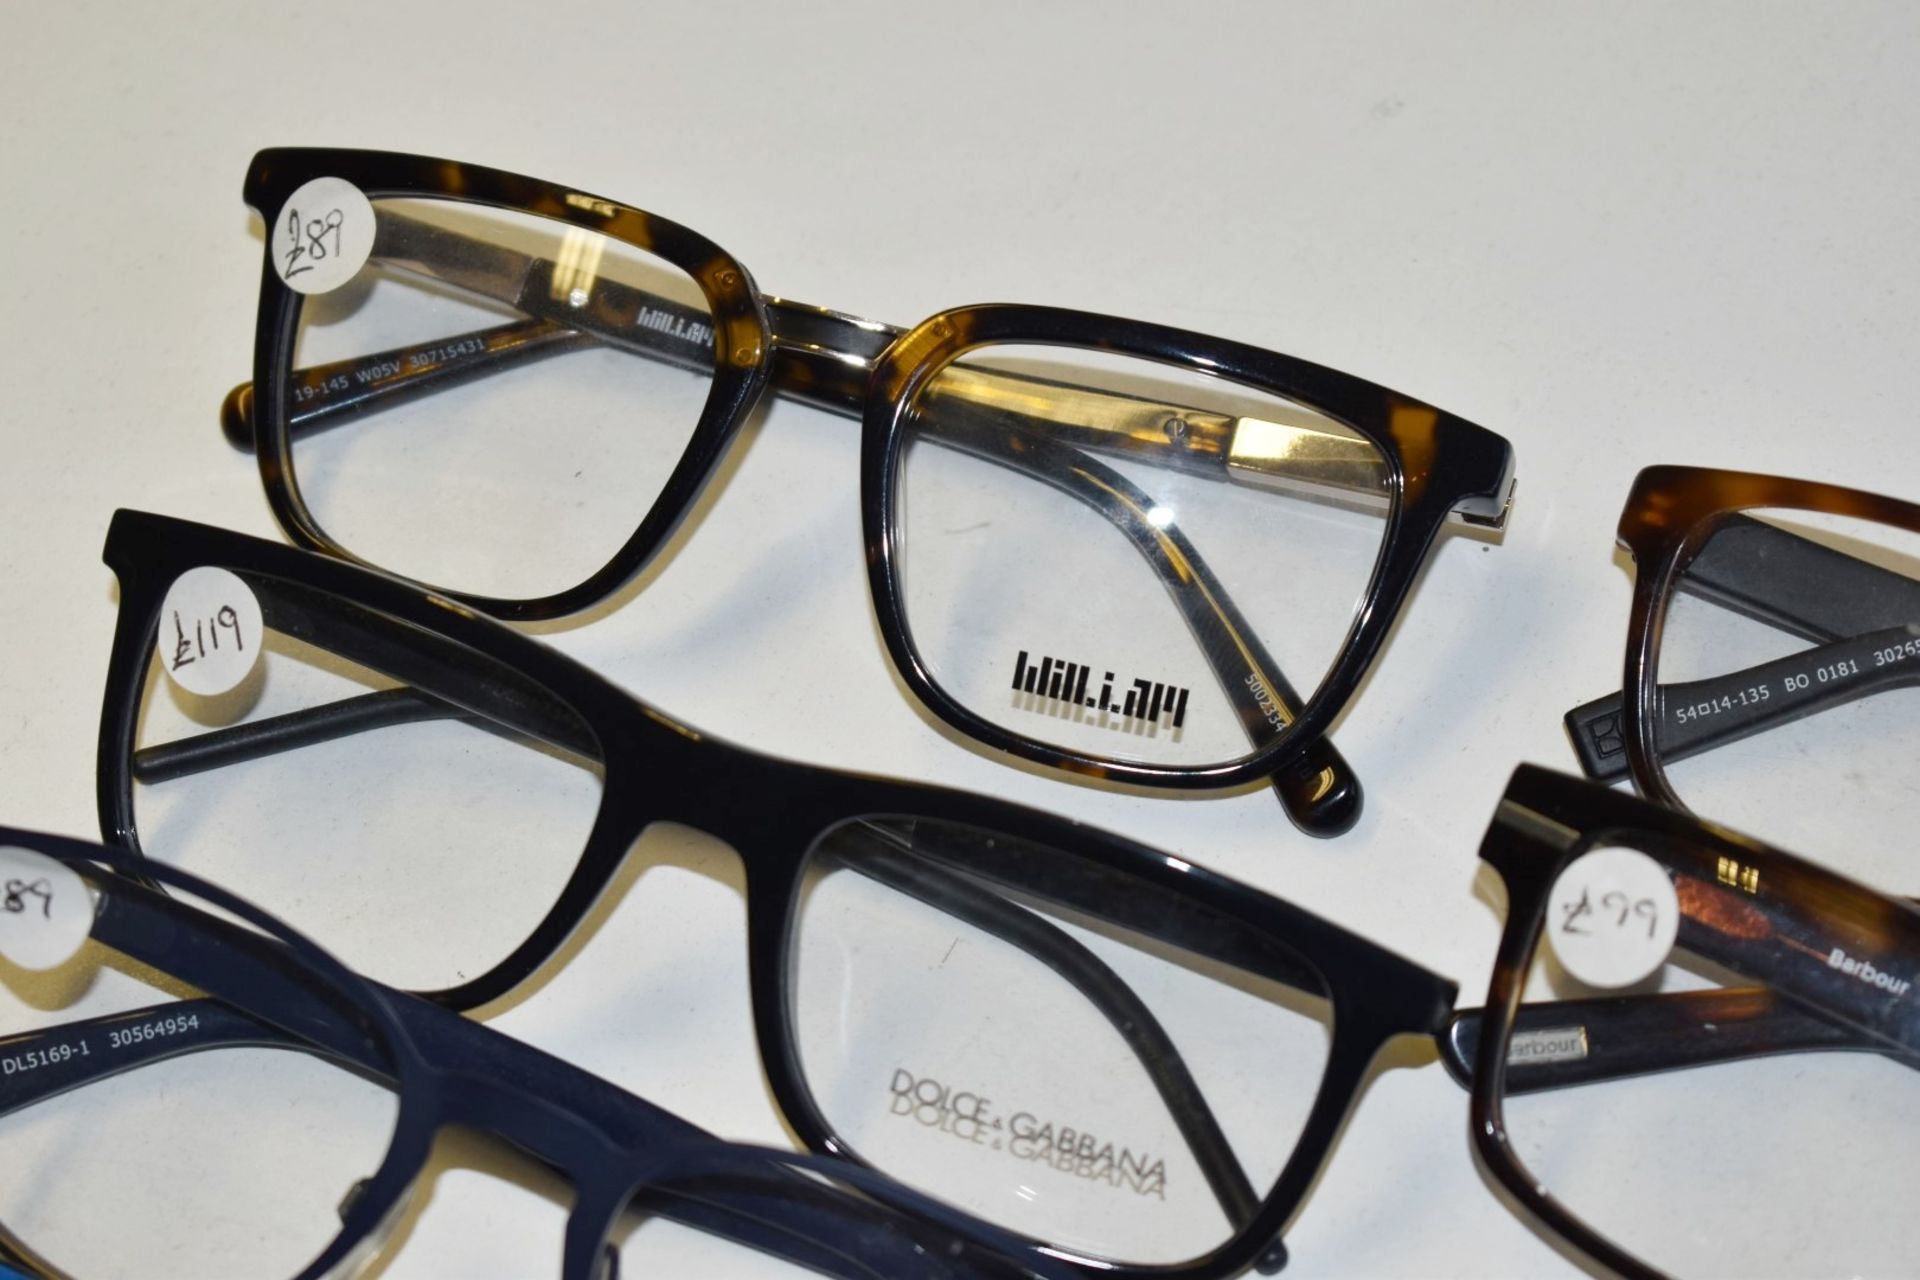 10 x Assorted Pairs of Designer Spectacle Eye Glasses - Ex Display Stock - Brands Include Dolce & - Image 2 of 10